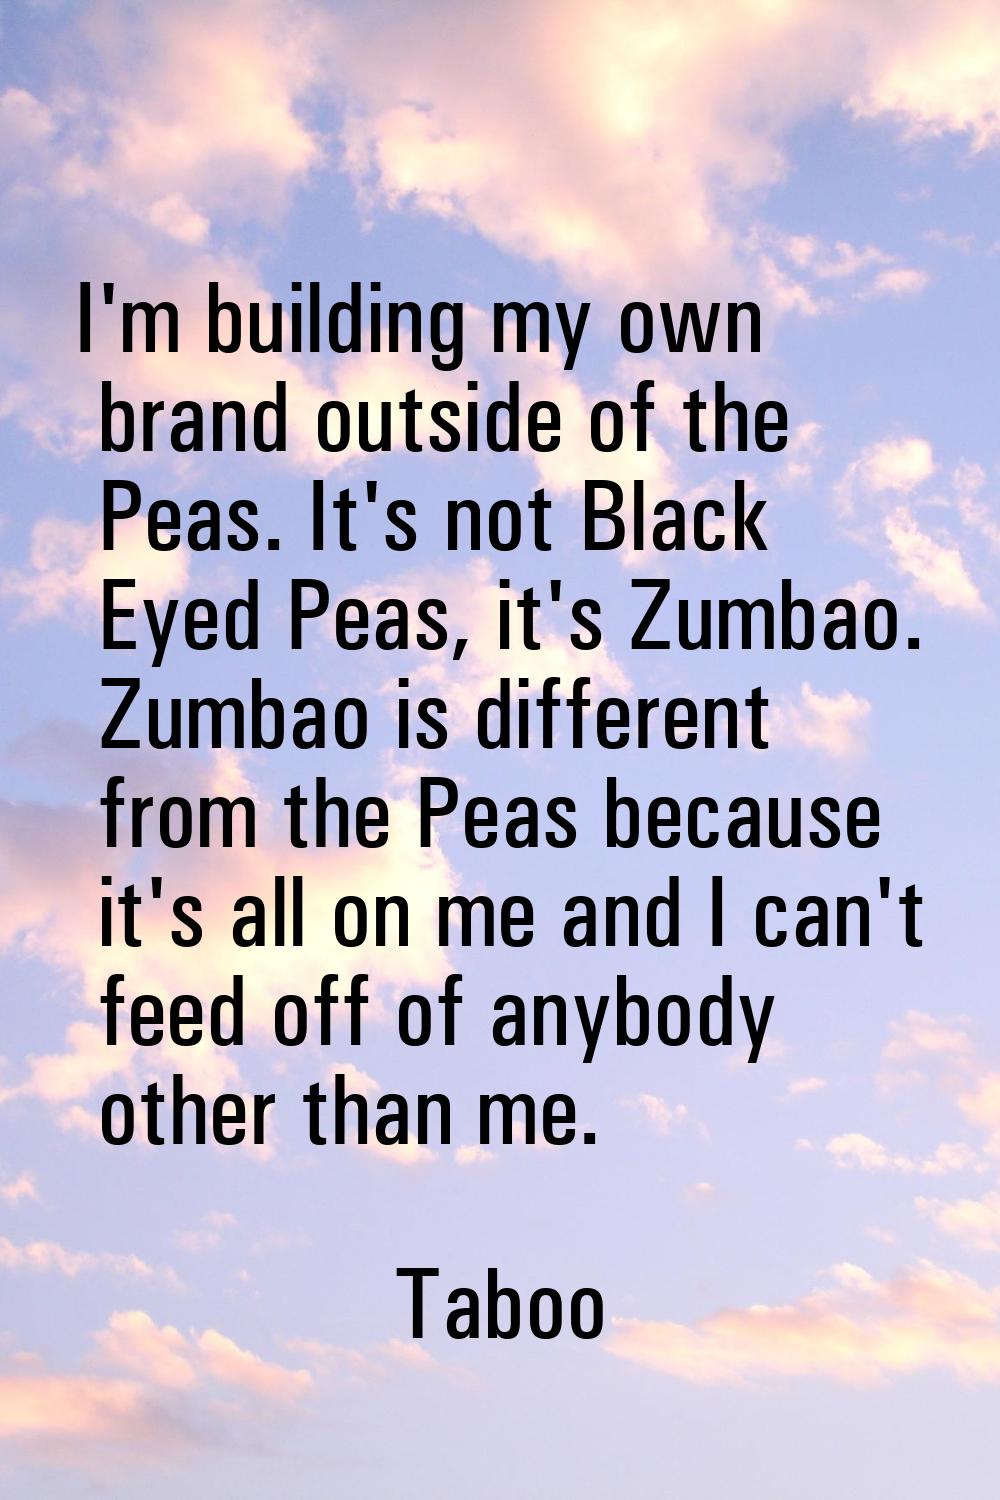 I'm building my own brand outside of the Peas. It's not Black Eyed Peas, it's Zumbao. Zumbao is dif